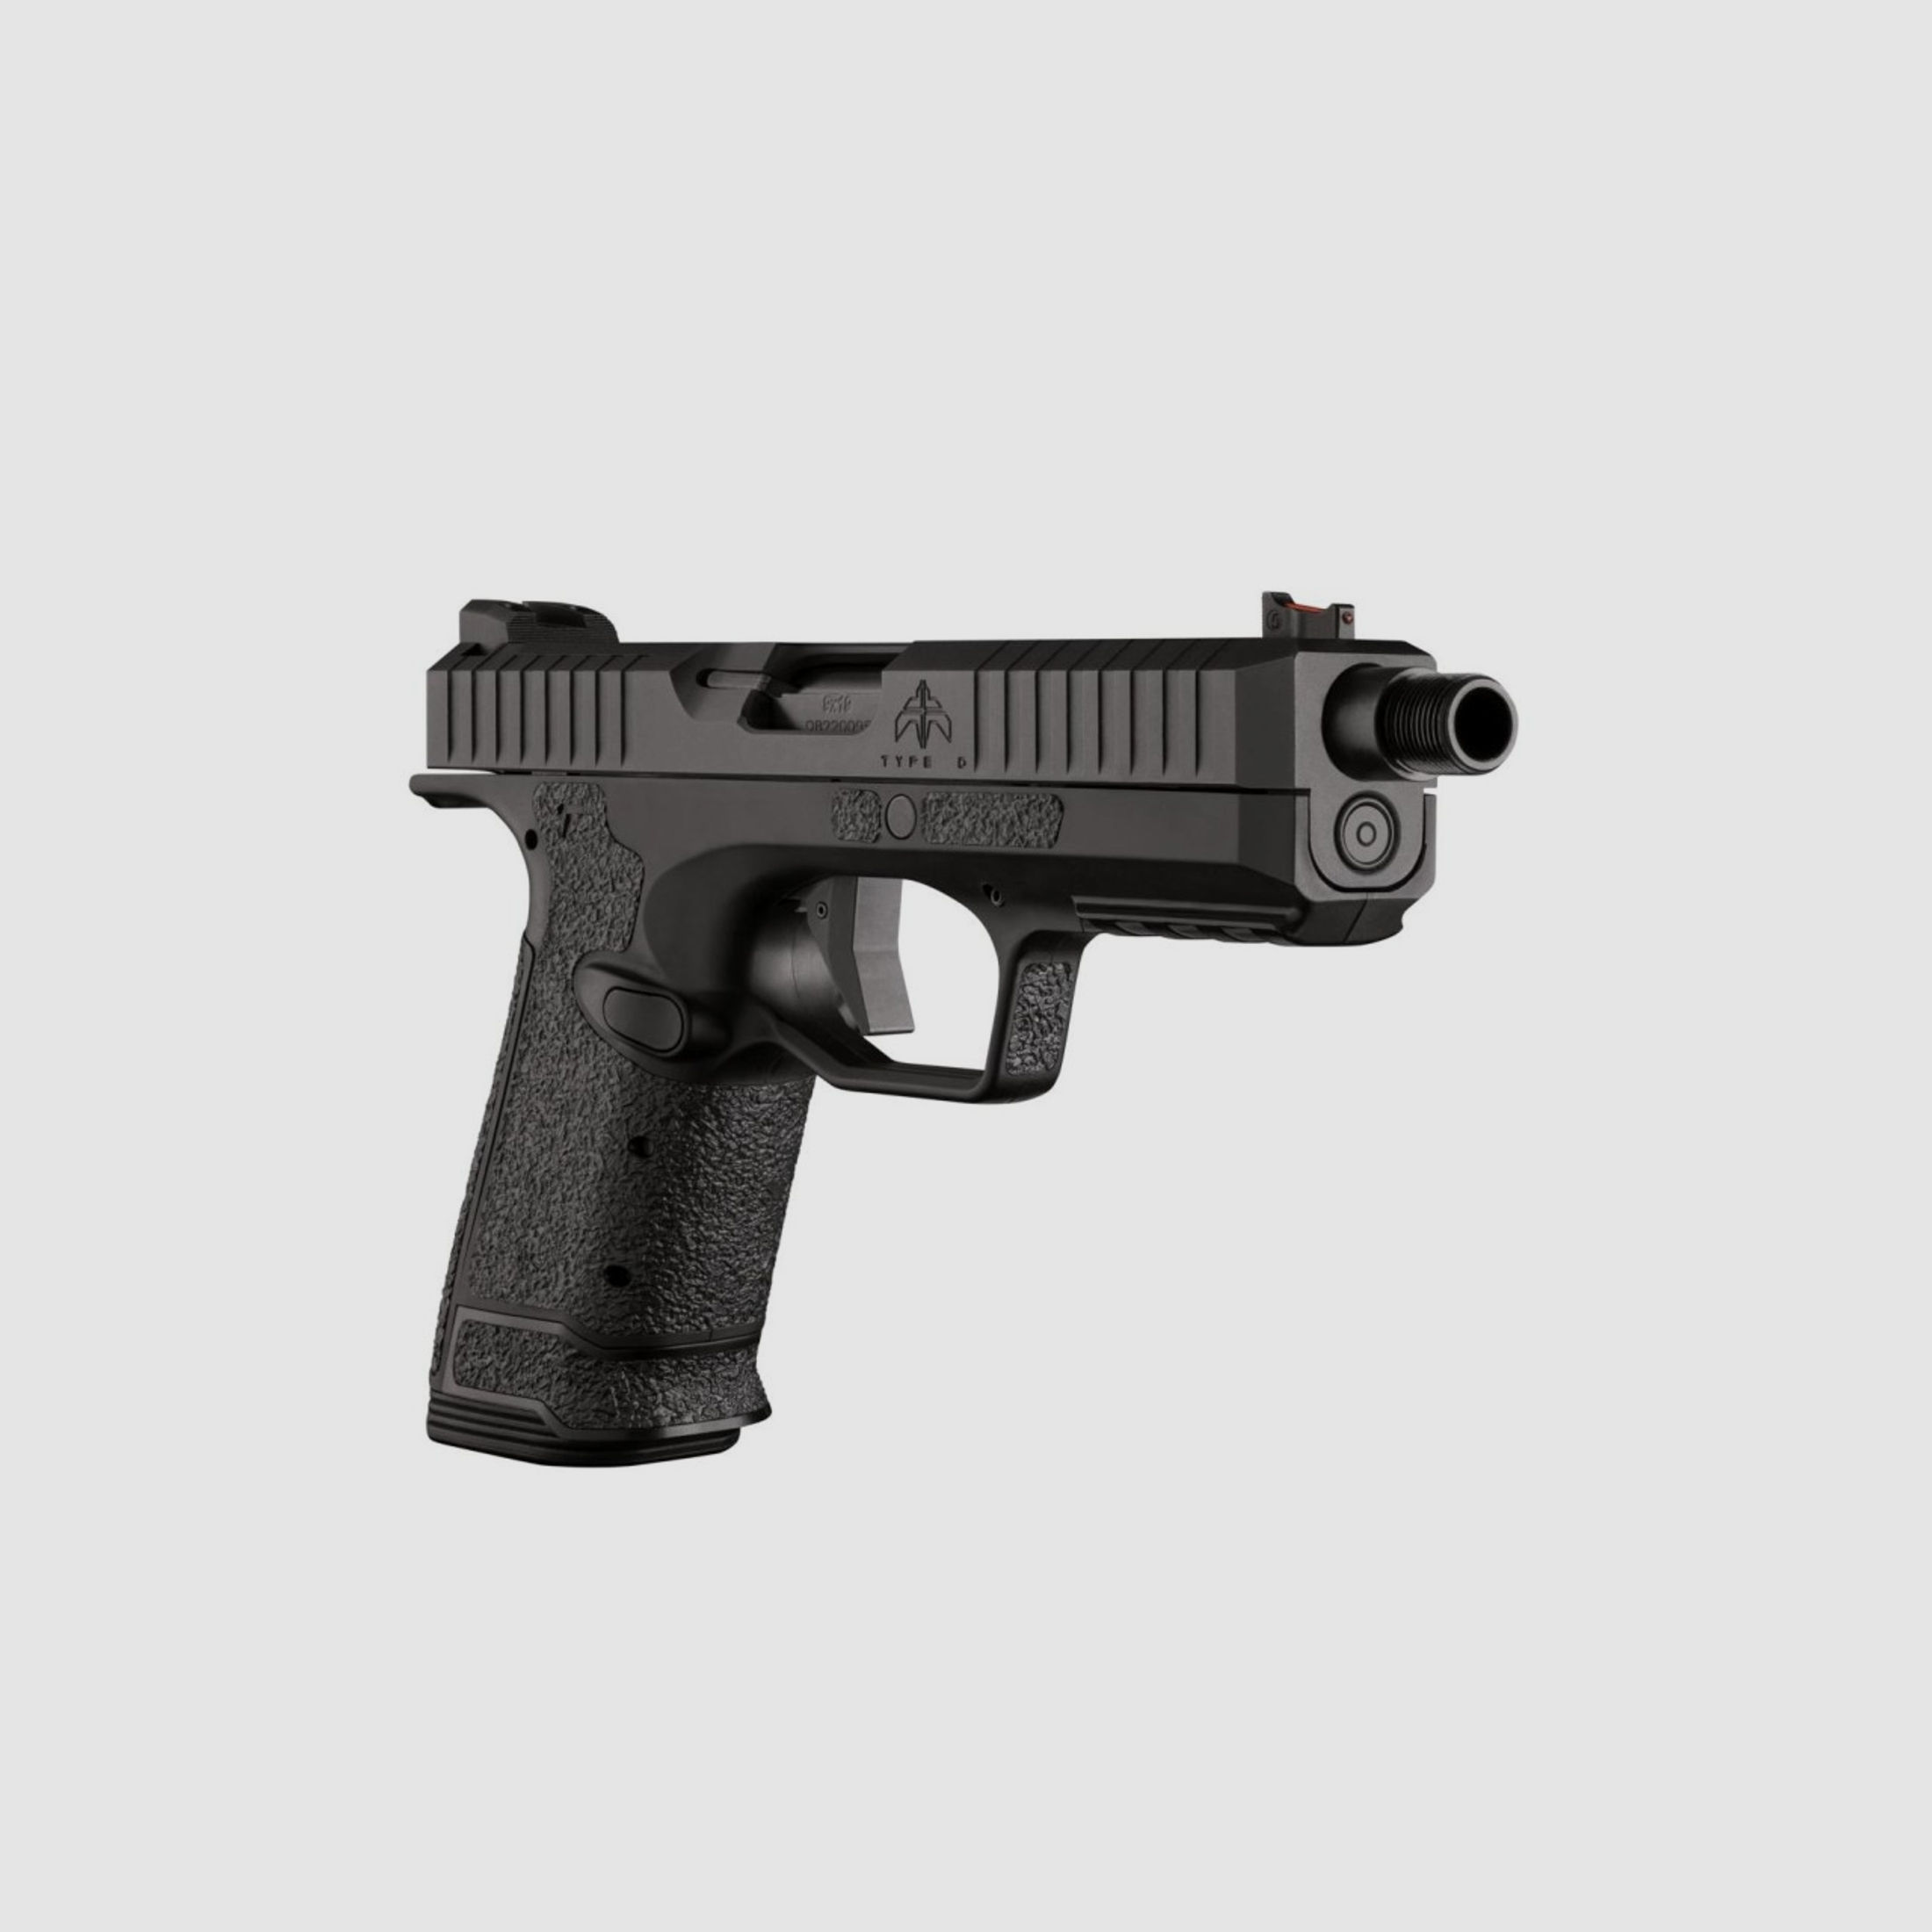 ARCHON FIREARMS - Pistole Type D OR SD inkl. Aimpoint ACRO P-2